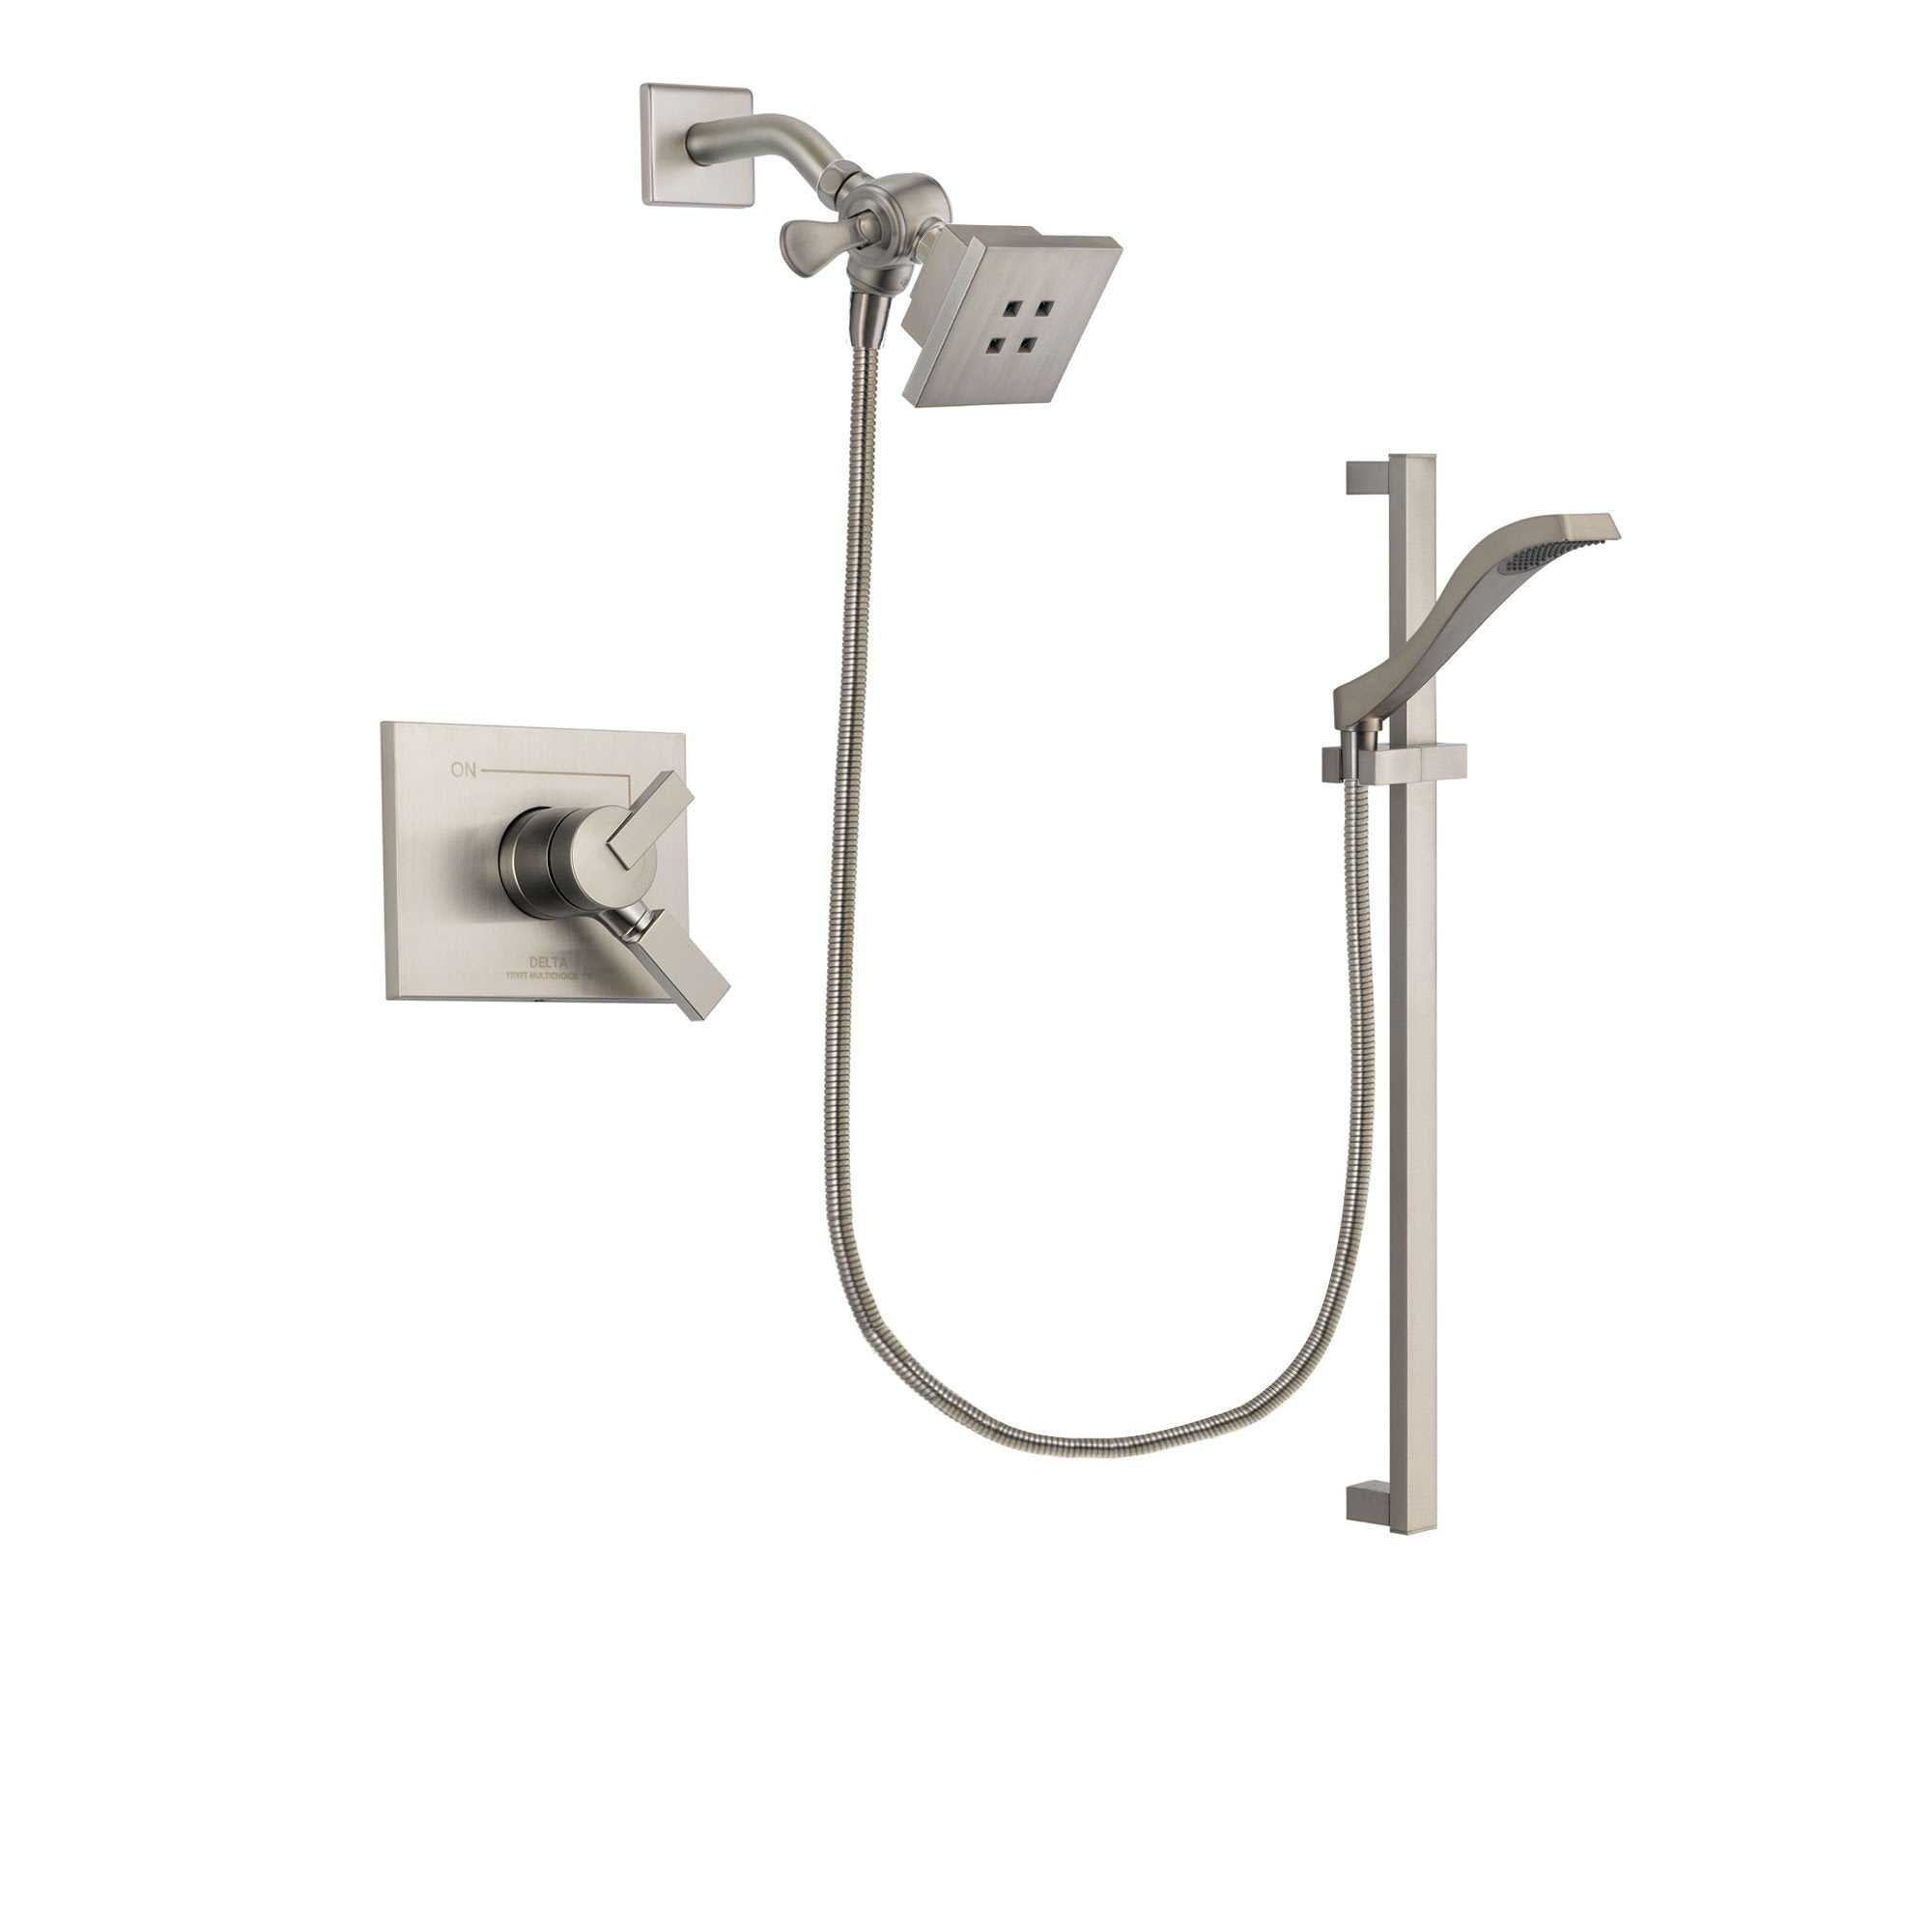 Delta Vero Stainless Steel Finish Dual Control Shower Faucet System Package with Square Showerhead and Handheld Shower with Slide Bar Includes Rough-in Valve DSP2234V